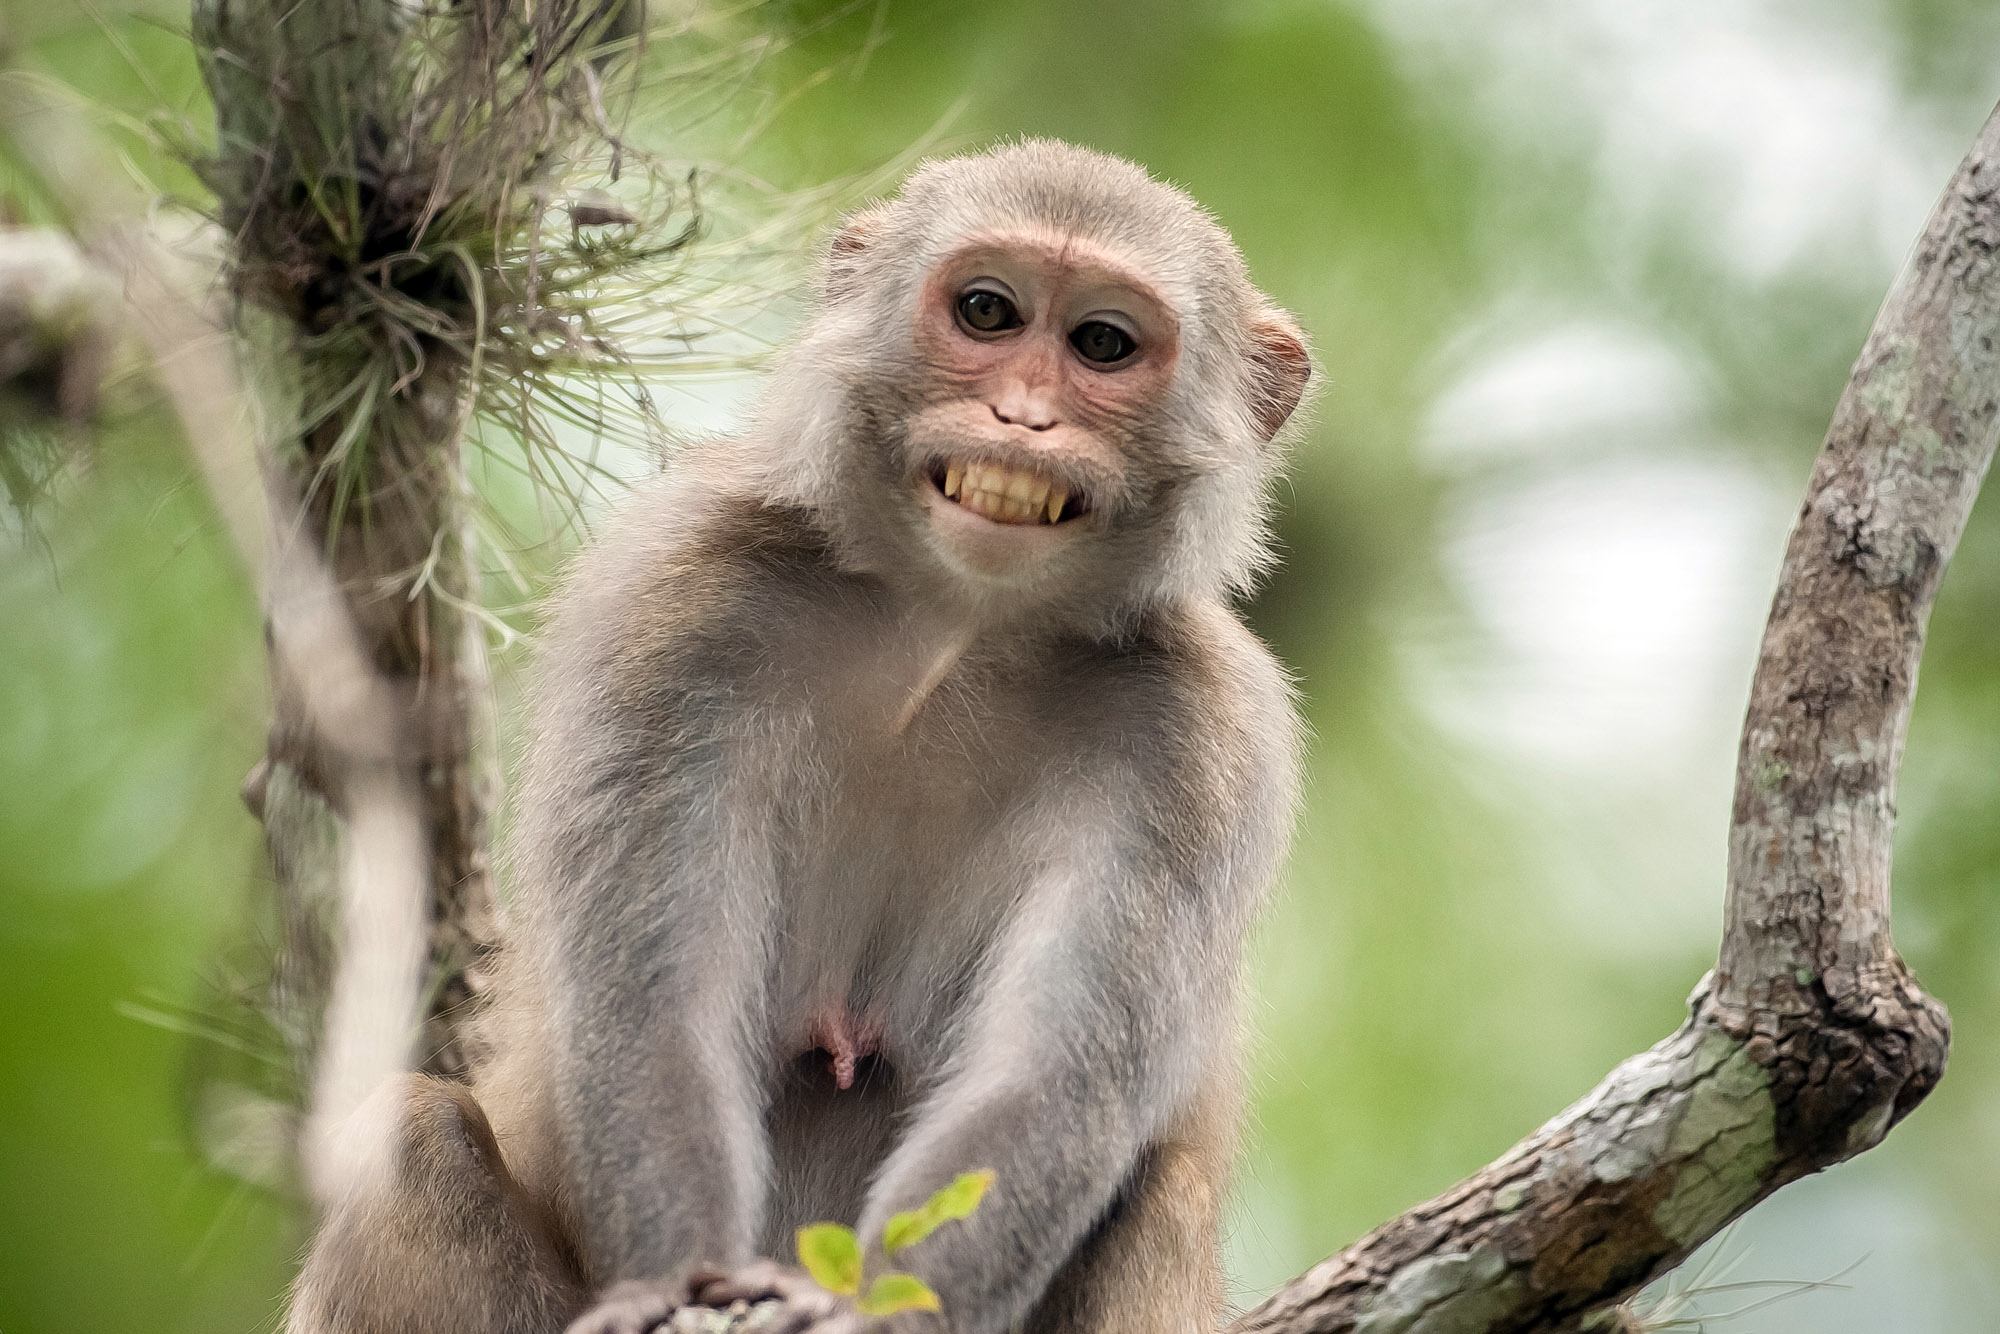 Monkeygate Bewildered Florida Residents Discover Another Secret Monkey 